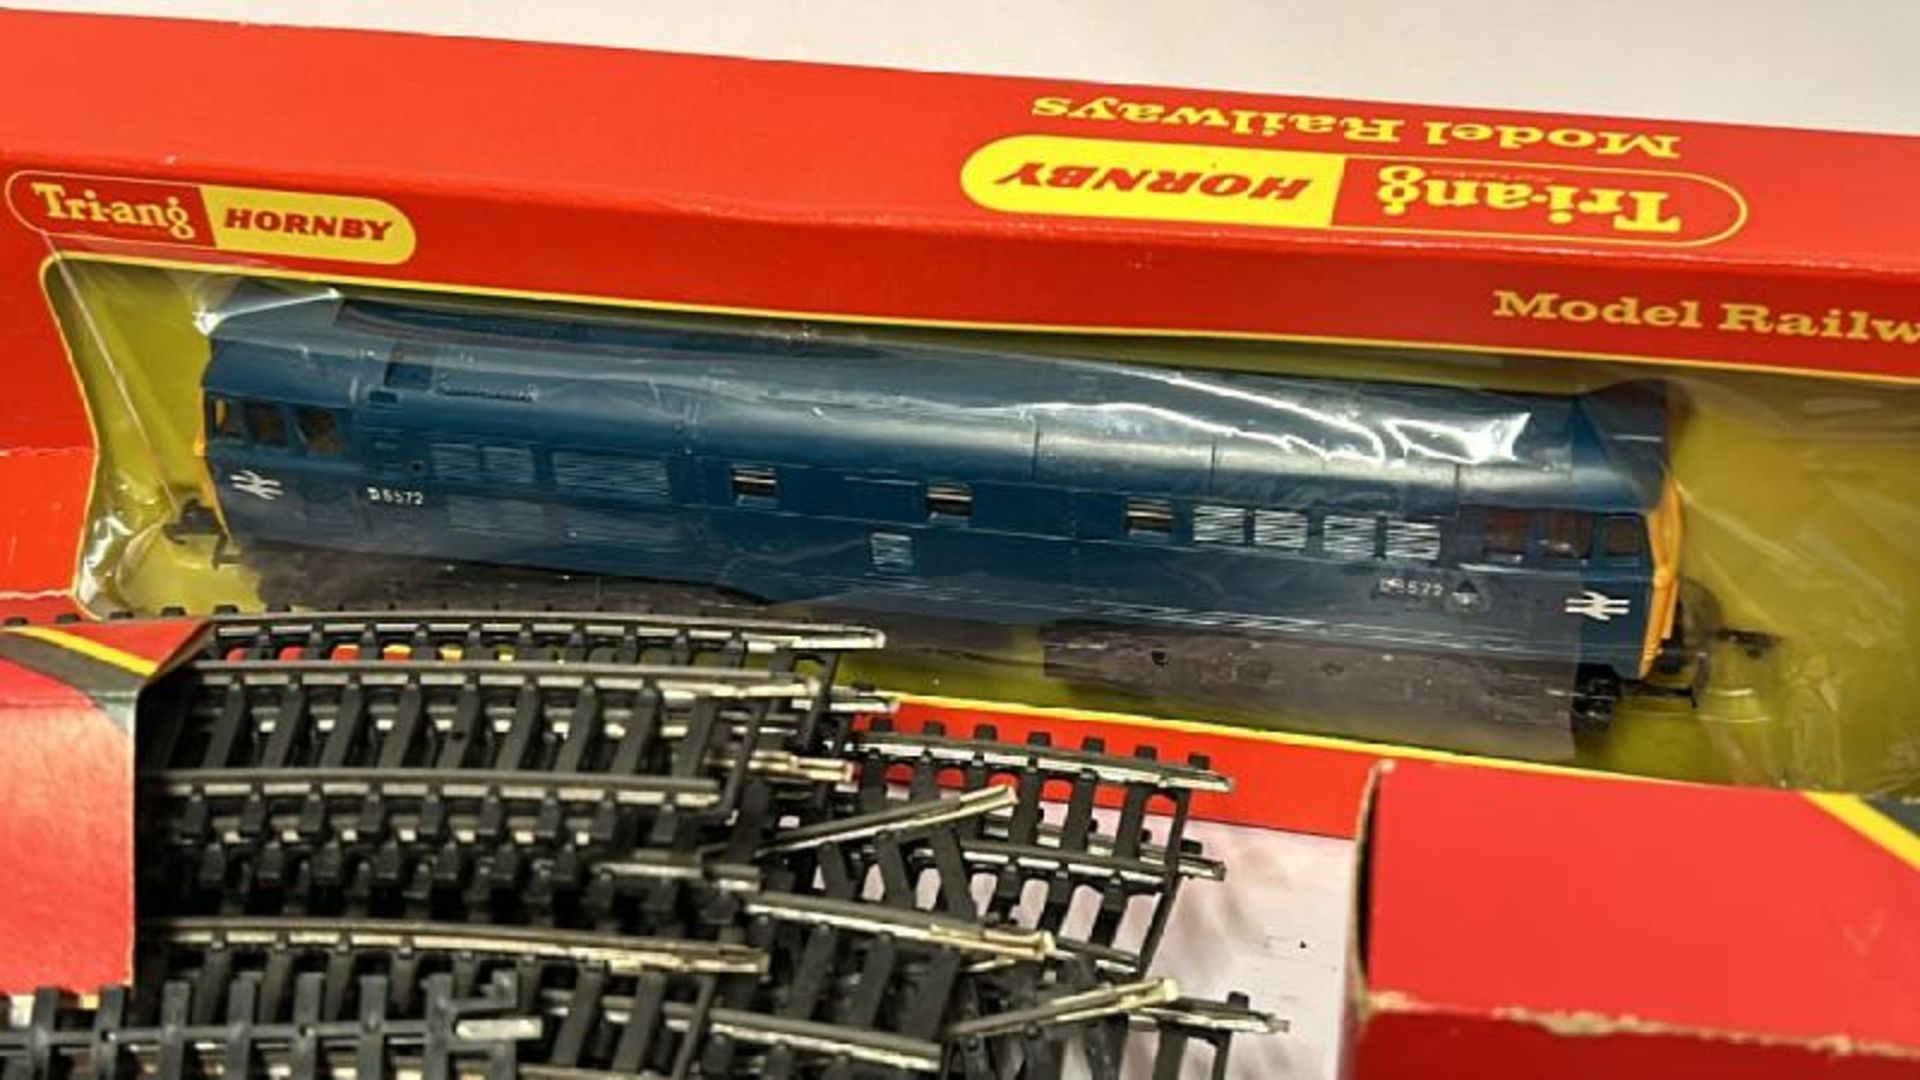 Collection of model trains, track and accessories including Hornby diesel engine D5572, figures, - Image 2 of 10